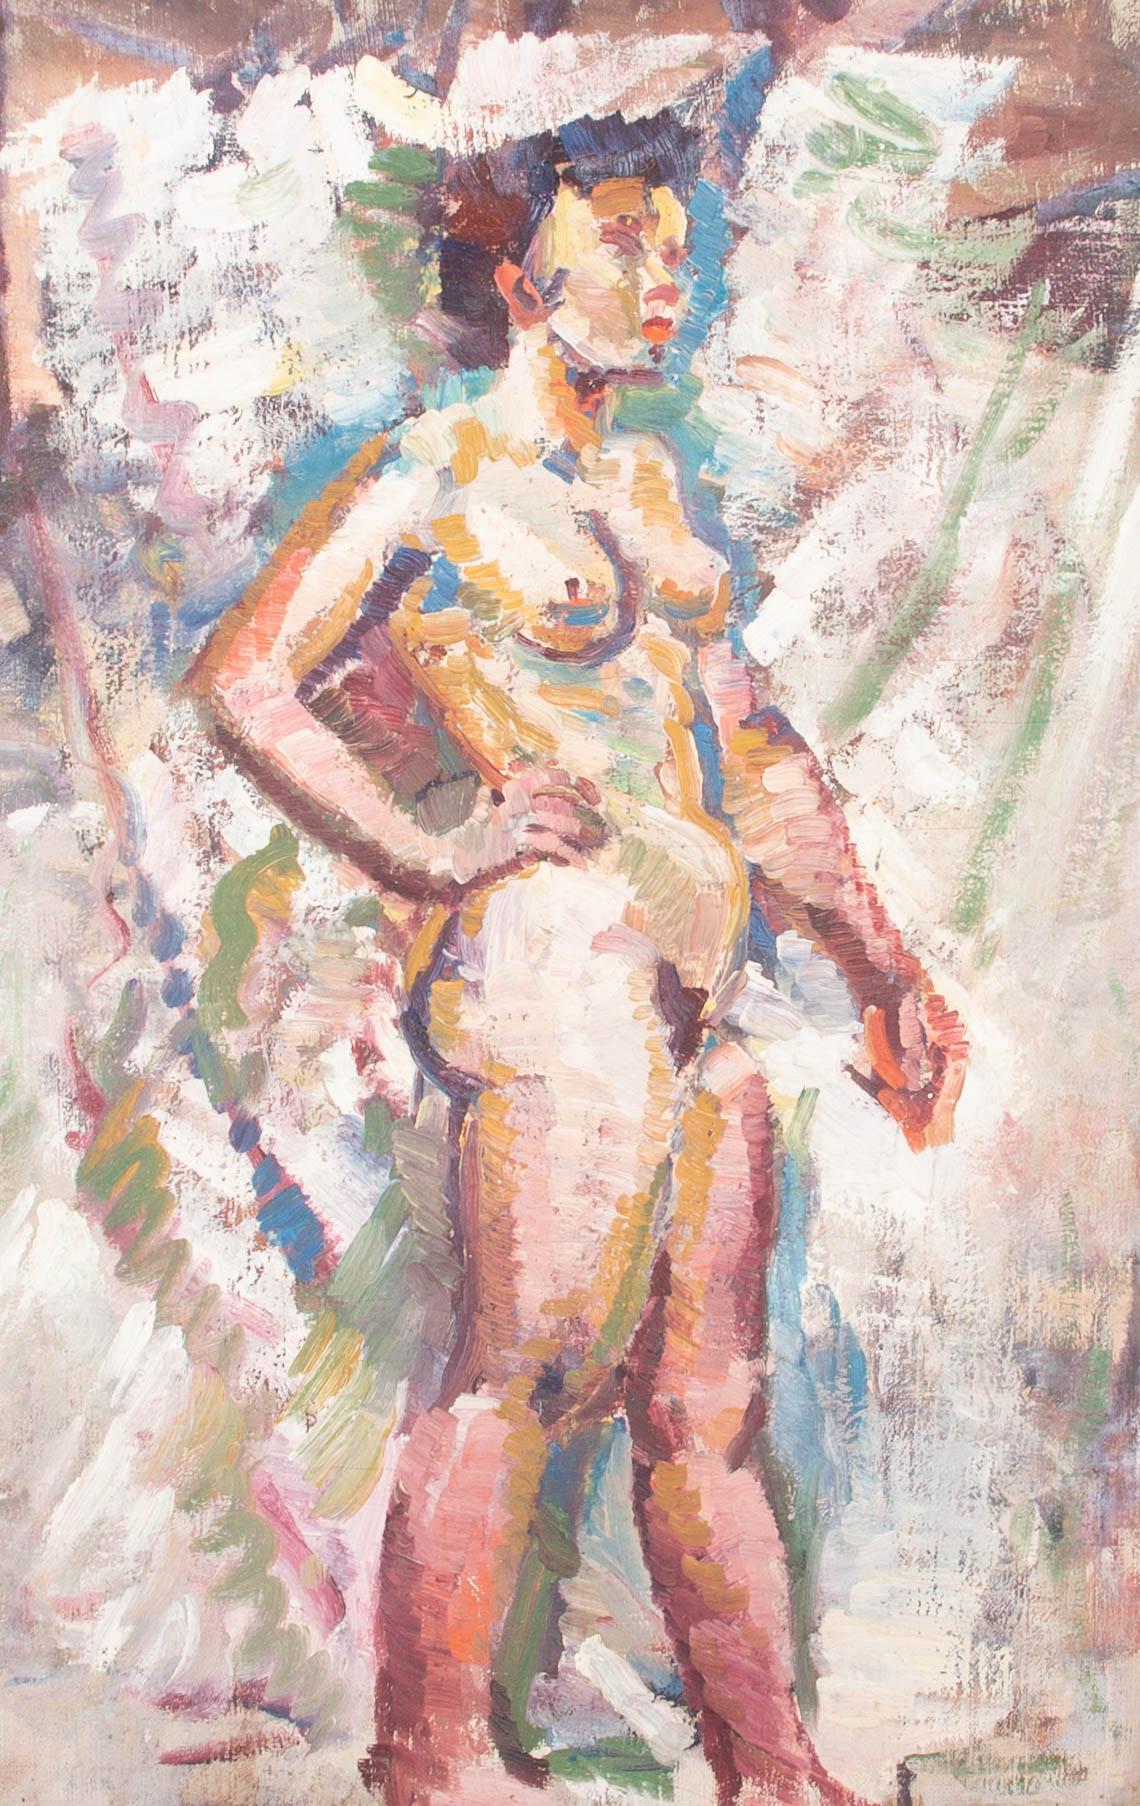 Unknown Portrait Painting - Impressionist 20th Century Oil - Posing Nude Figure